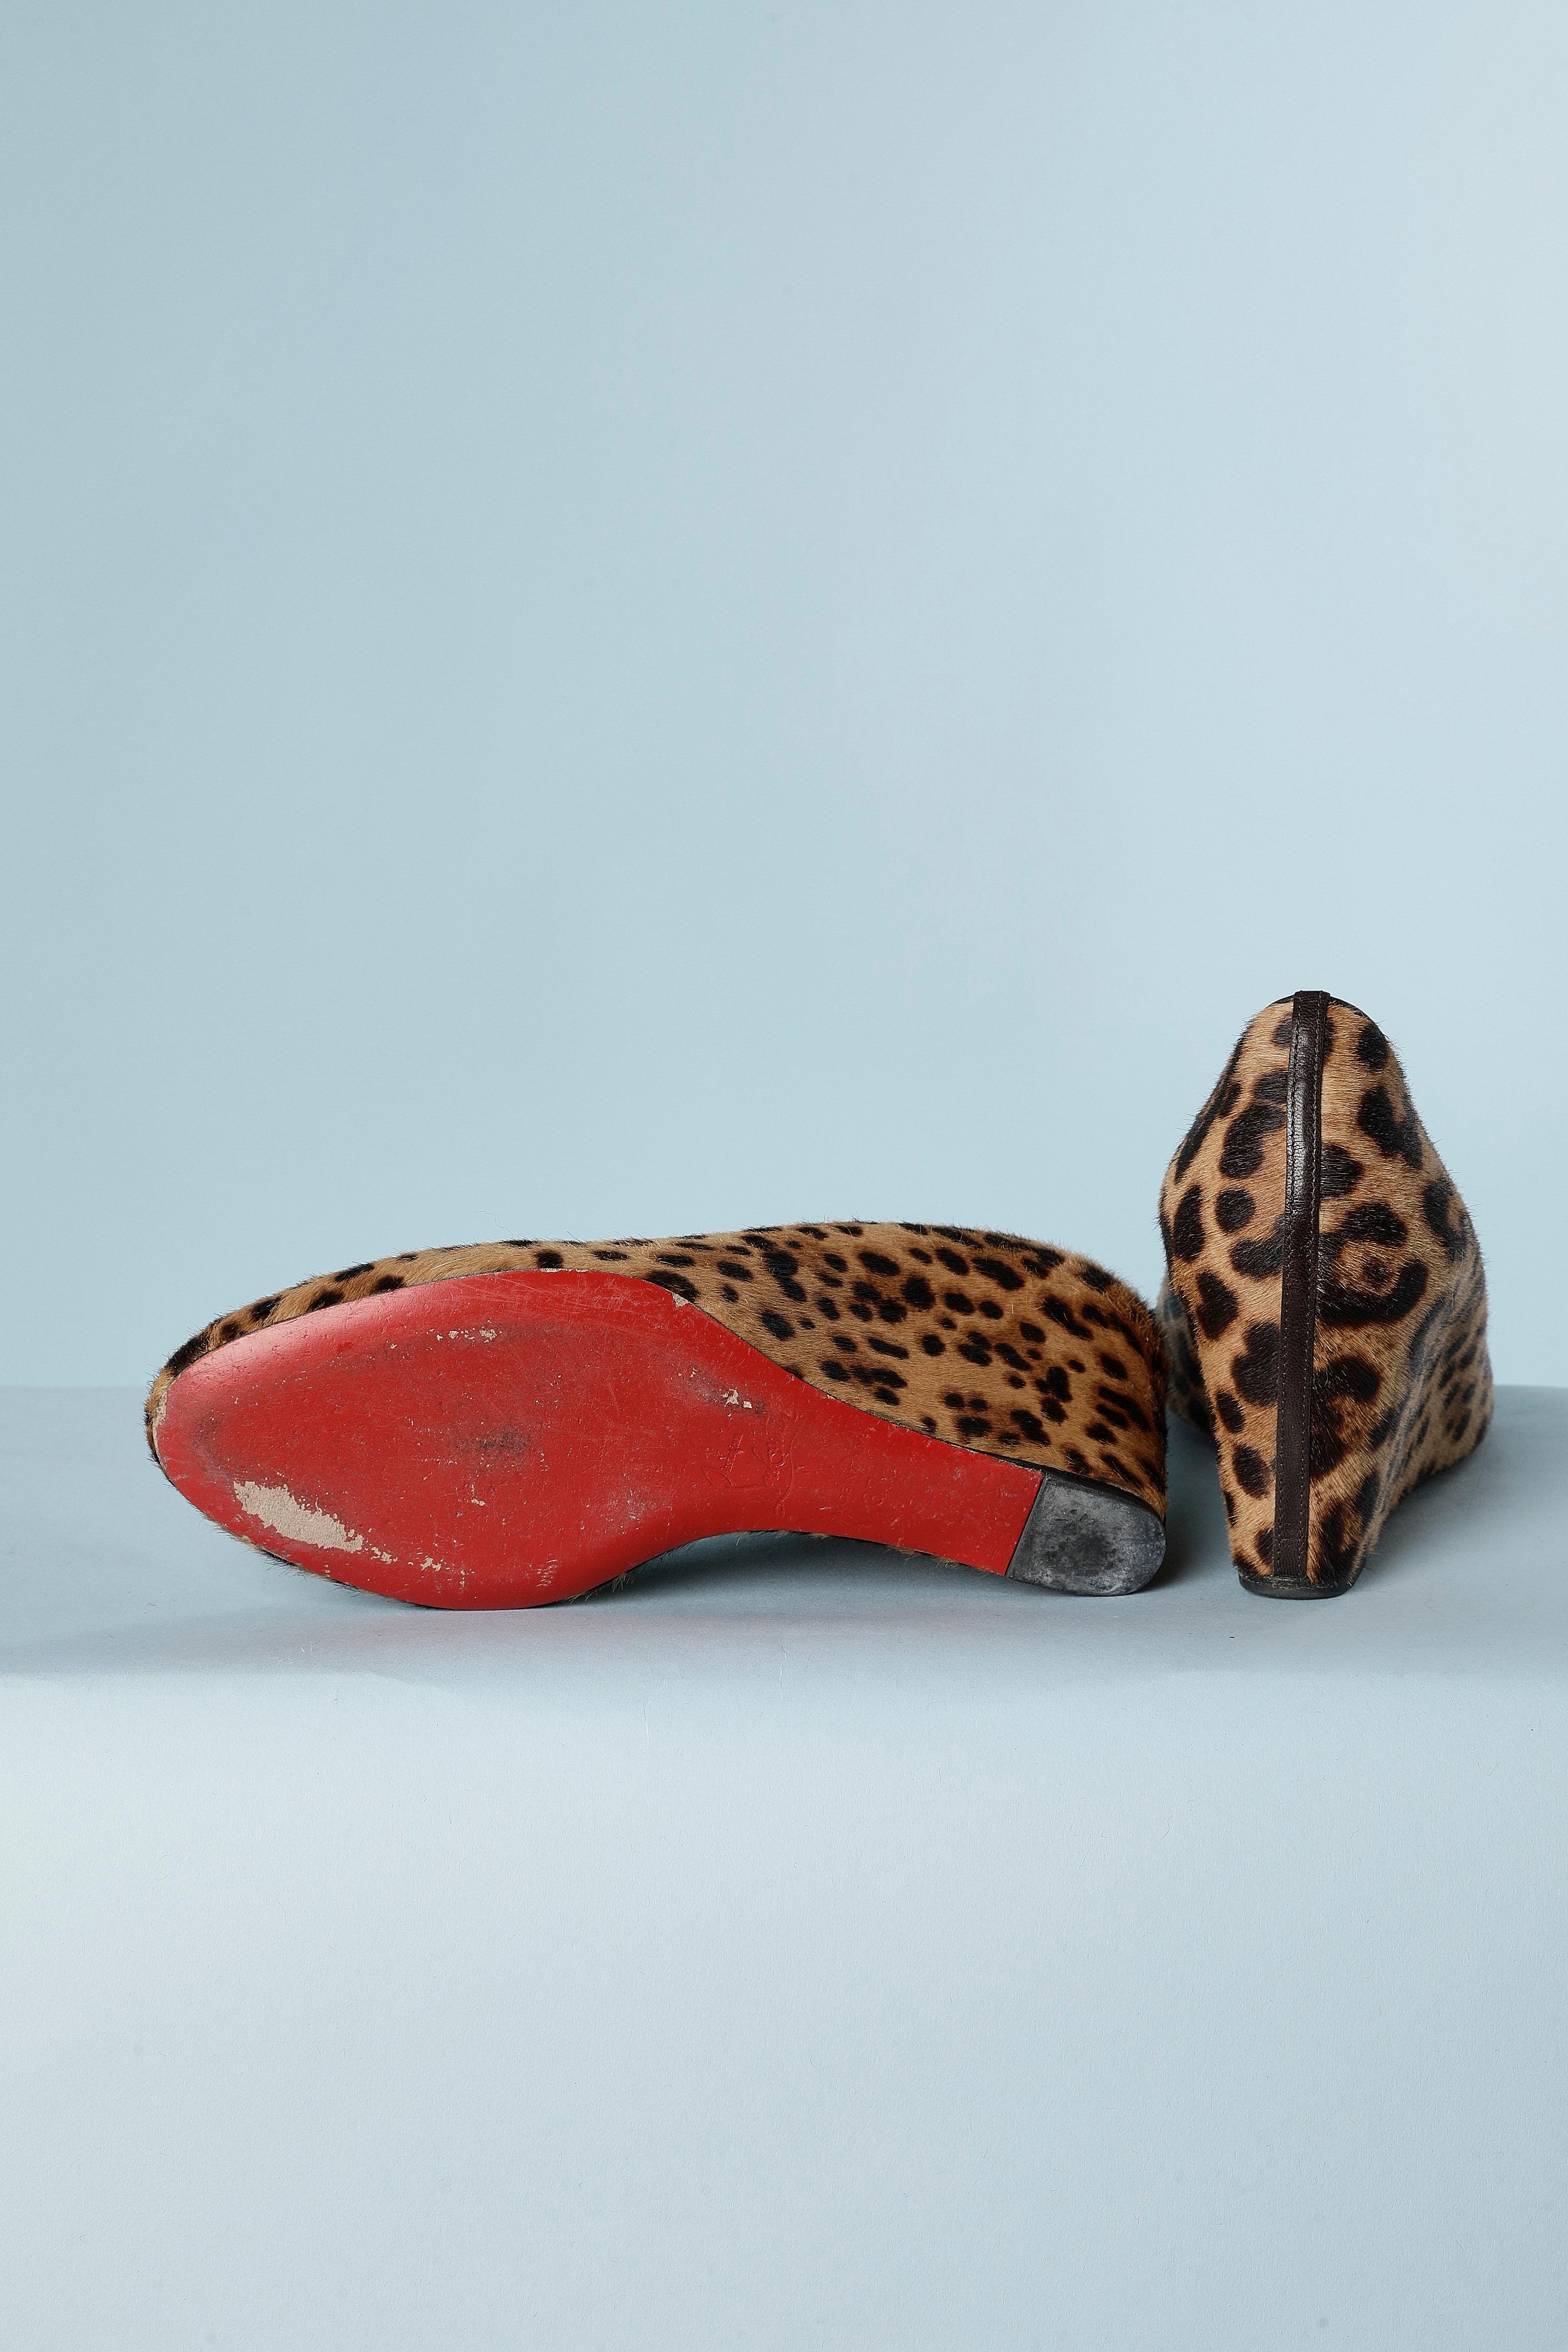 Women's Wedge heel  pump made of goat fur with leopard print on Christian Louboutin  For Sale